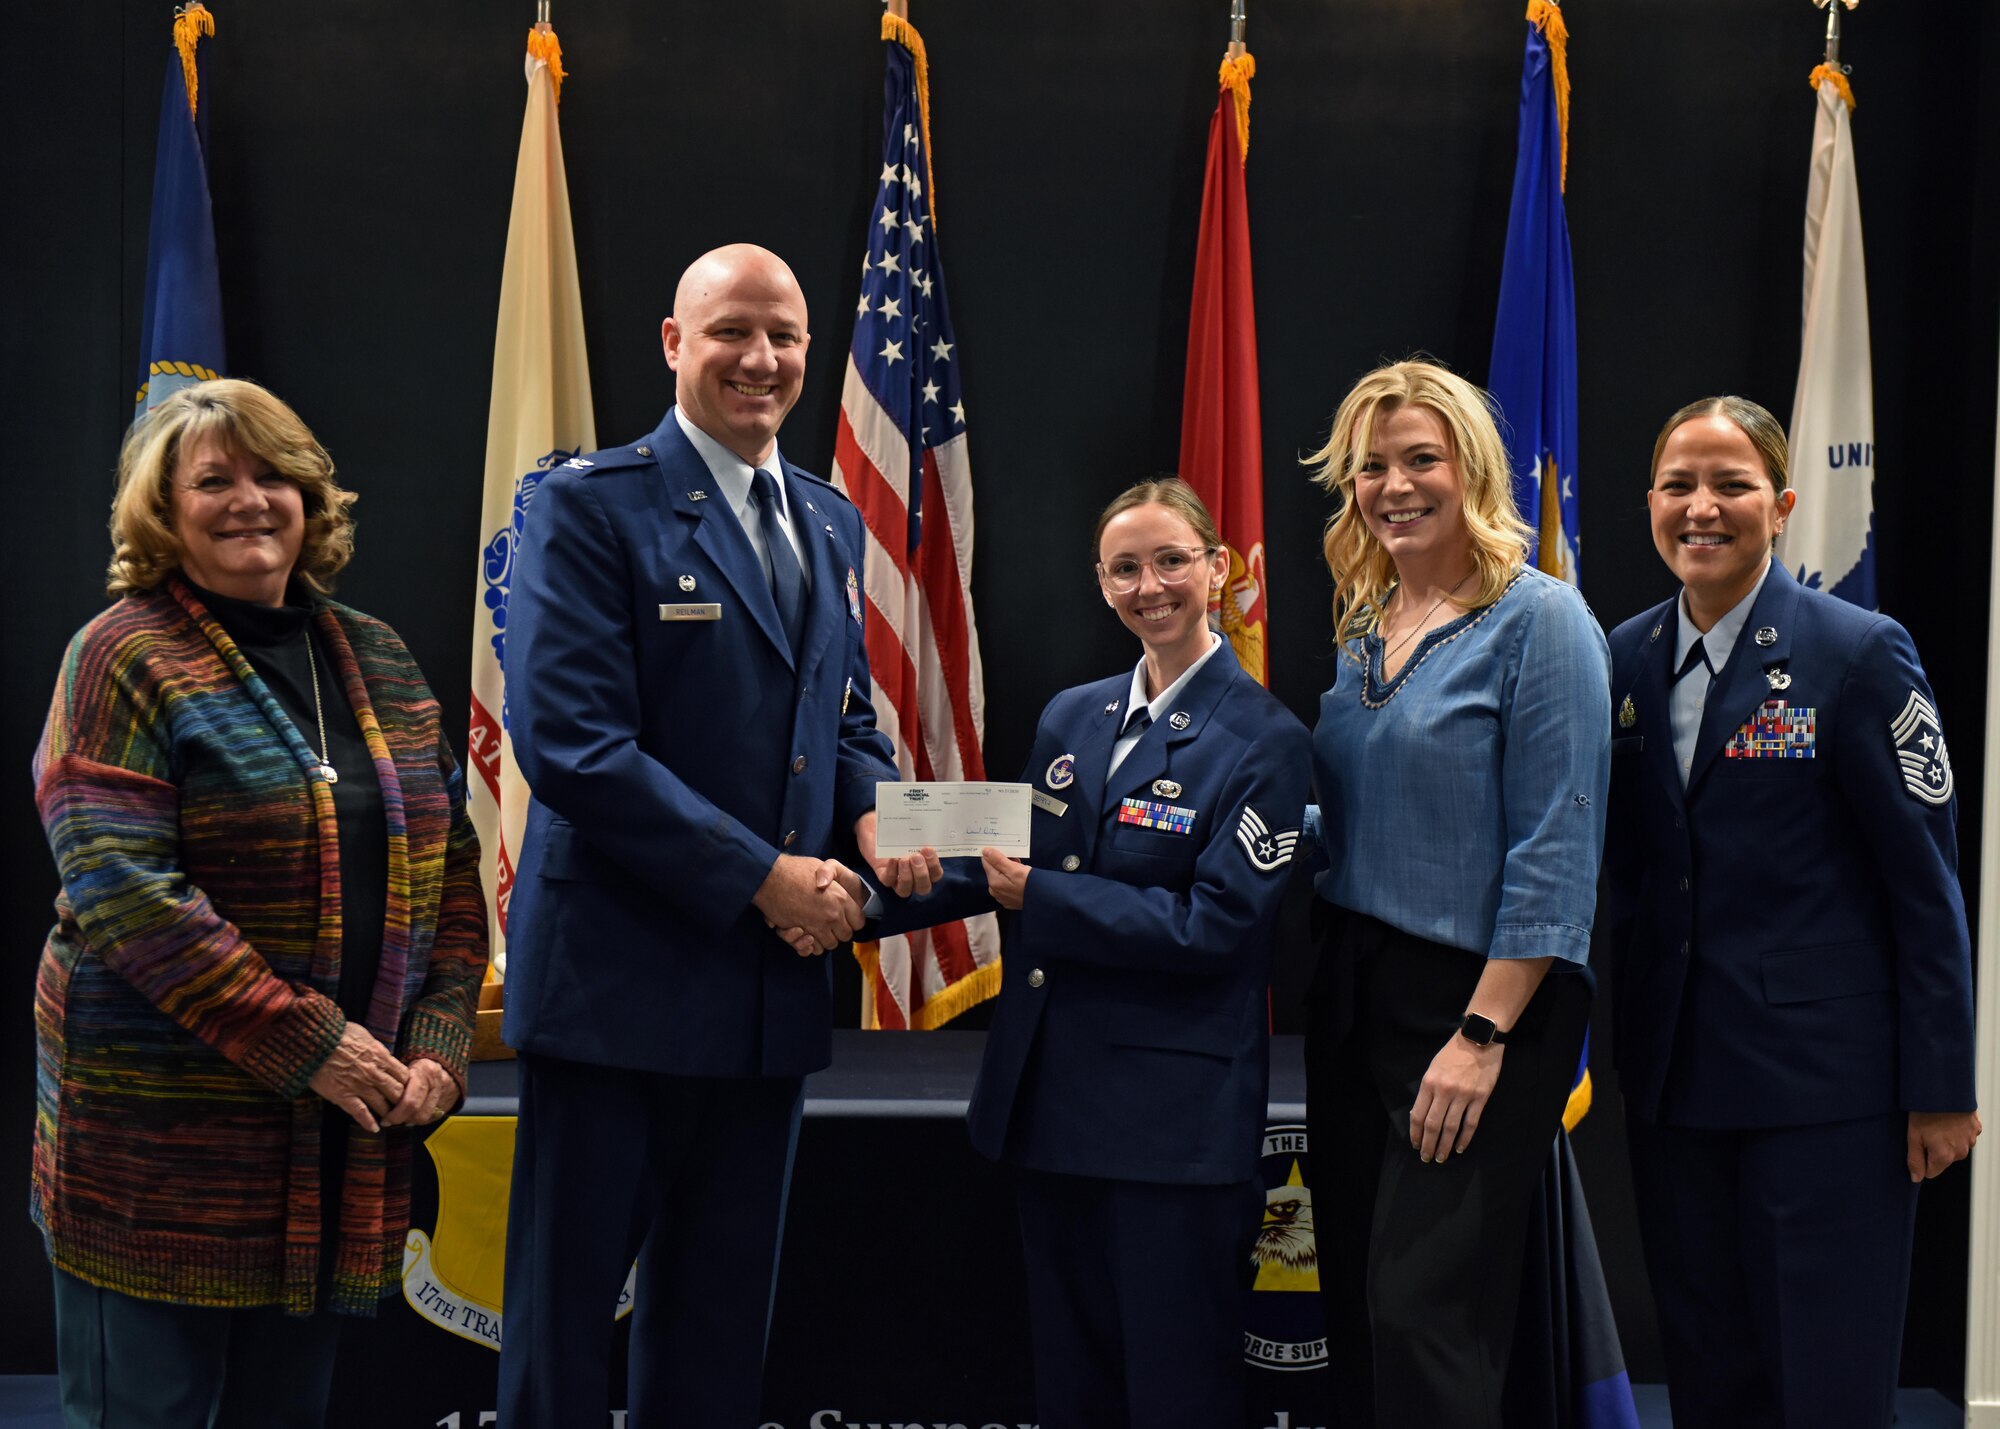 The relatives of the late retired U.S. Air Force Col. Charles Powell, former 17th Training Wing commander, present the Powell Warrior Award to Staff Sgt. Taylor Serna, 316th Training Squadron instructor, at the Community College of the Air Force graduation in the Powell Event Center, Nov. 16, 2022. The award is presented to those who choose to continue education. (U.S. Air Force photo by Airman 1st Class Sarah Williams)